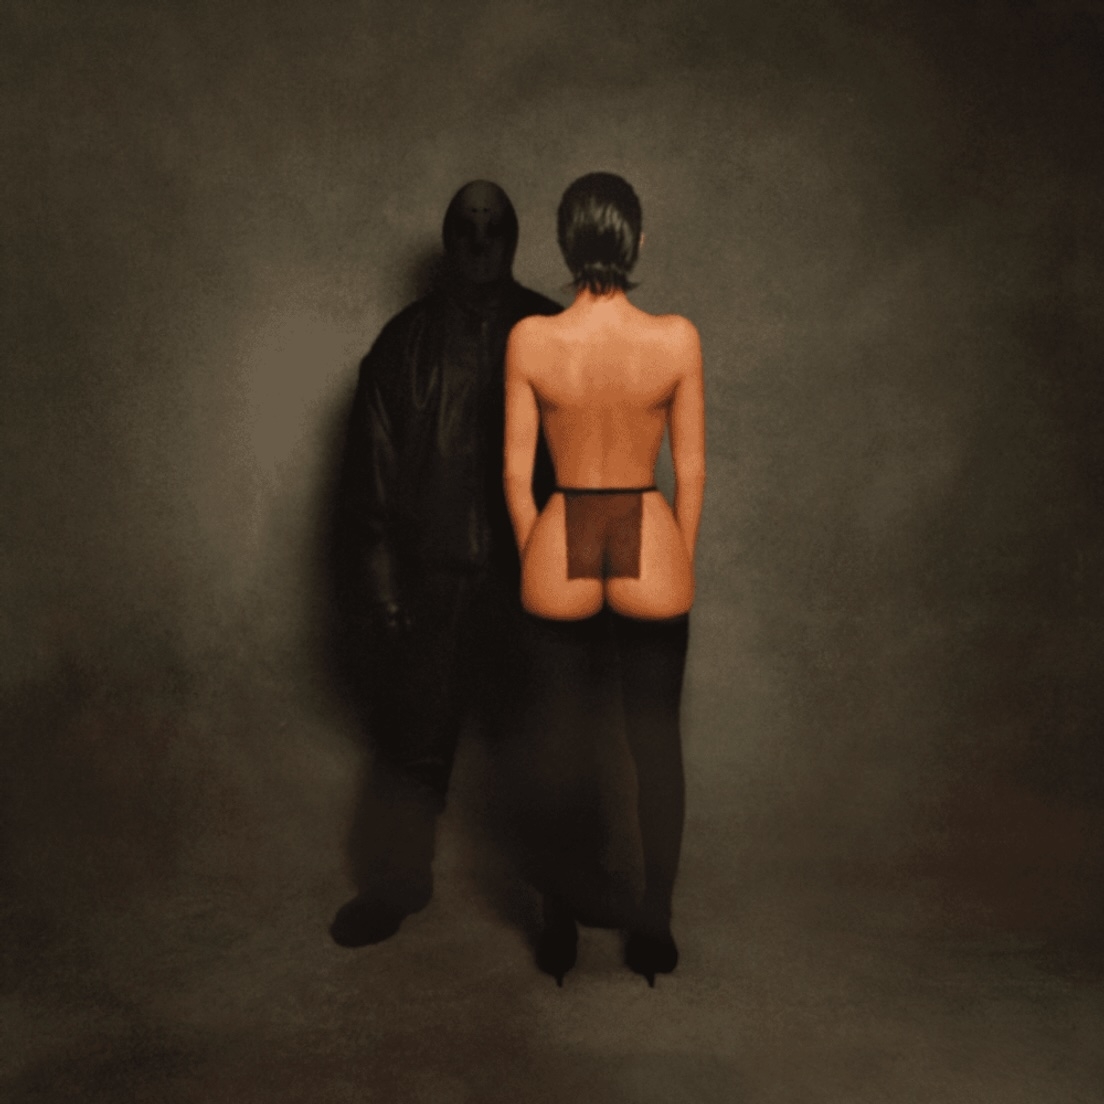 Two figures stand in a shadowy setting. One, dressed in black, faces forward. The other, wearing revealing attire, faces away from the camera